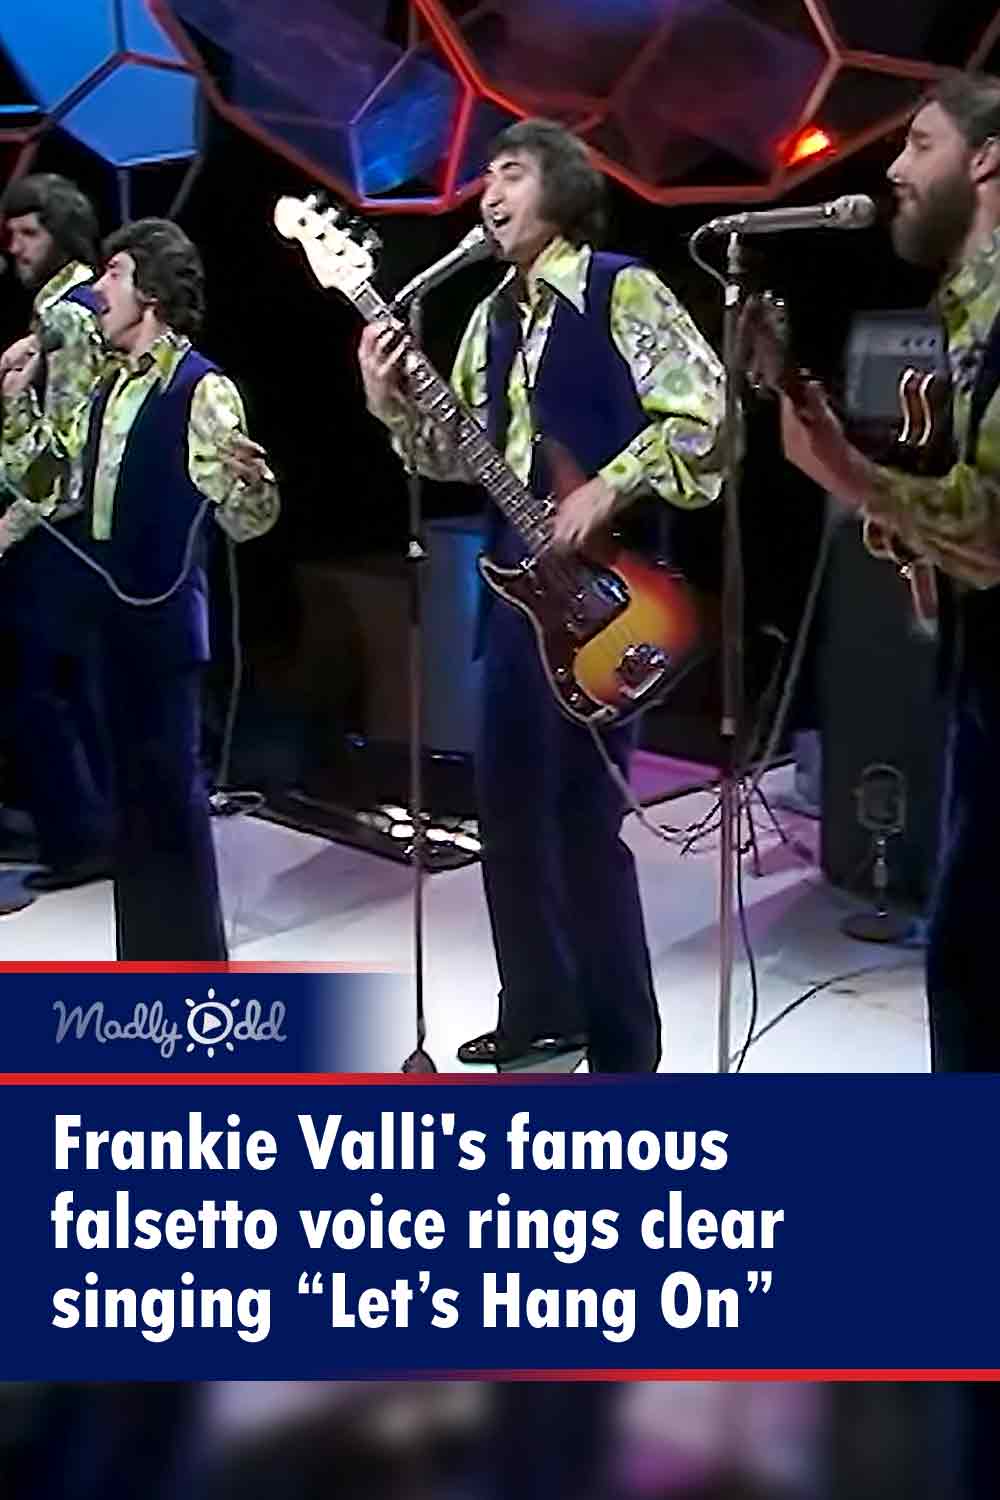 Frankie Valli\'s famous falsetto voice rings clear singing “Let’s Hang On”